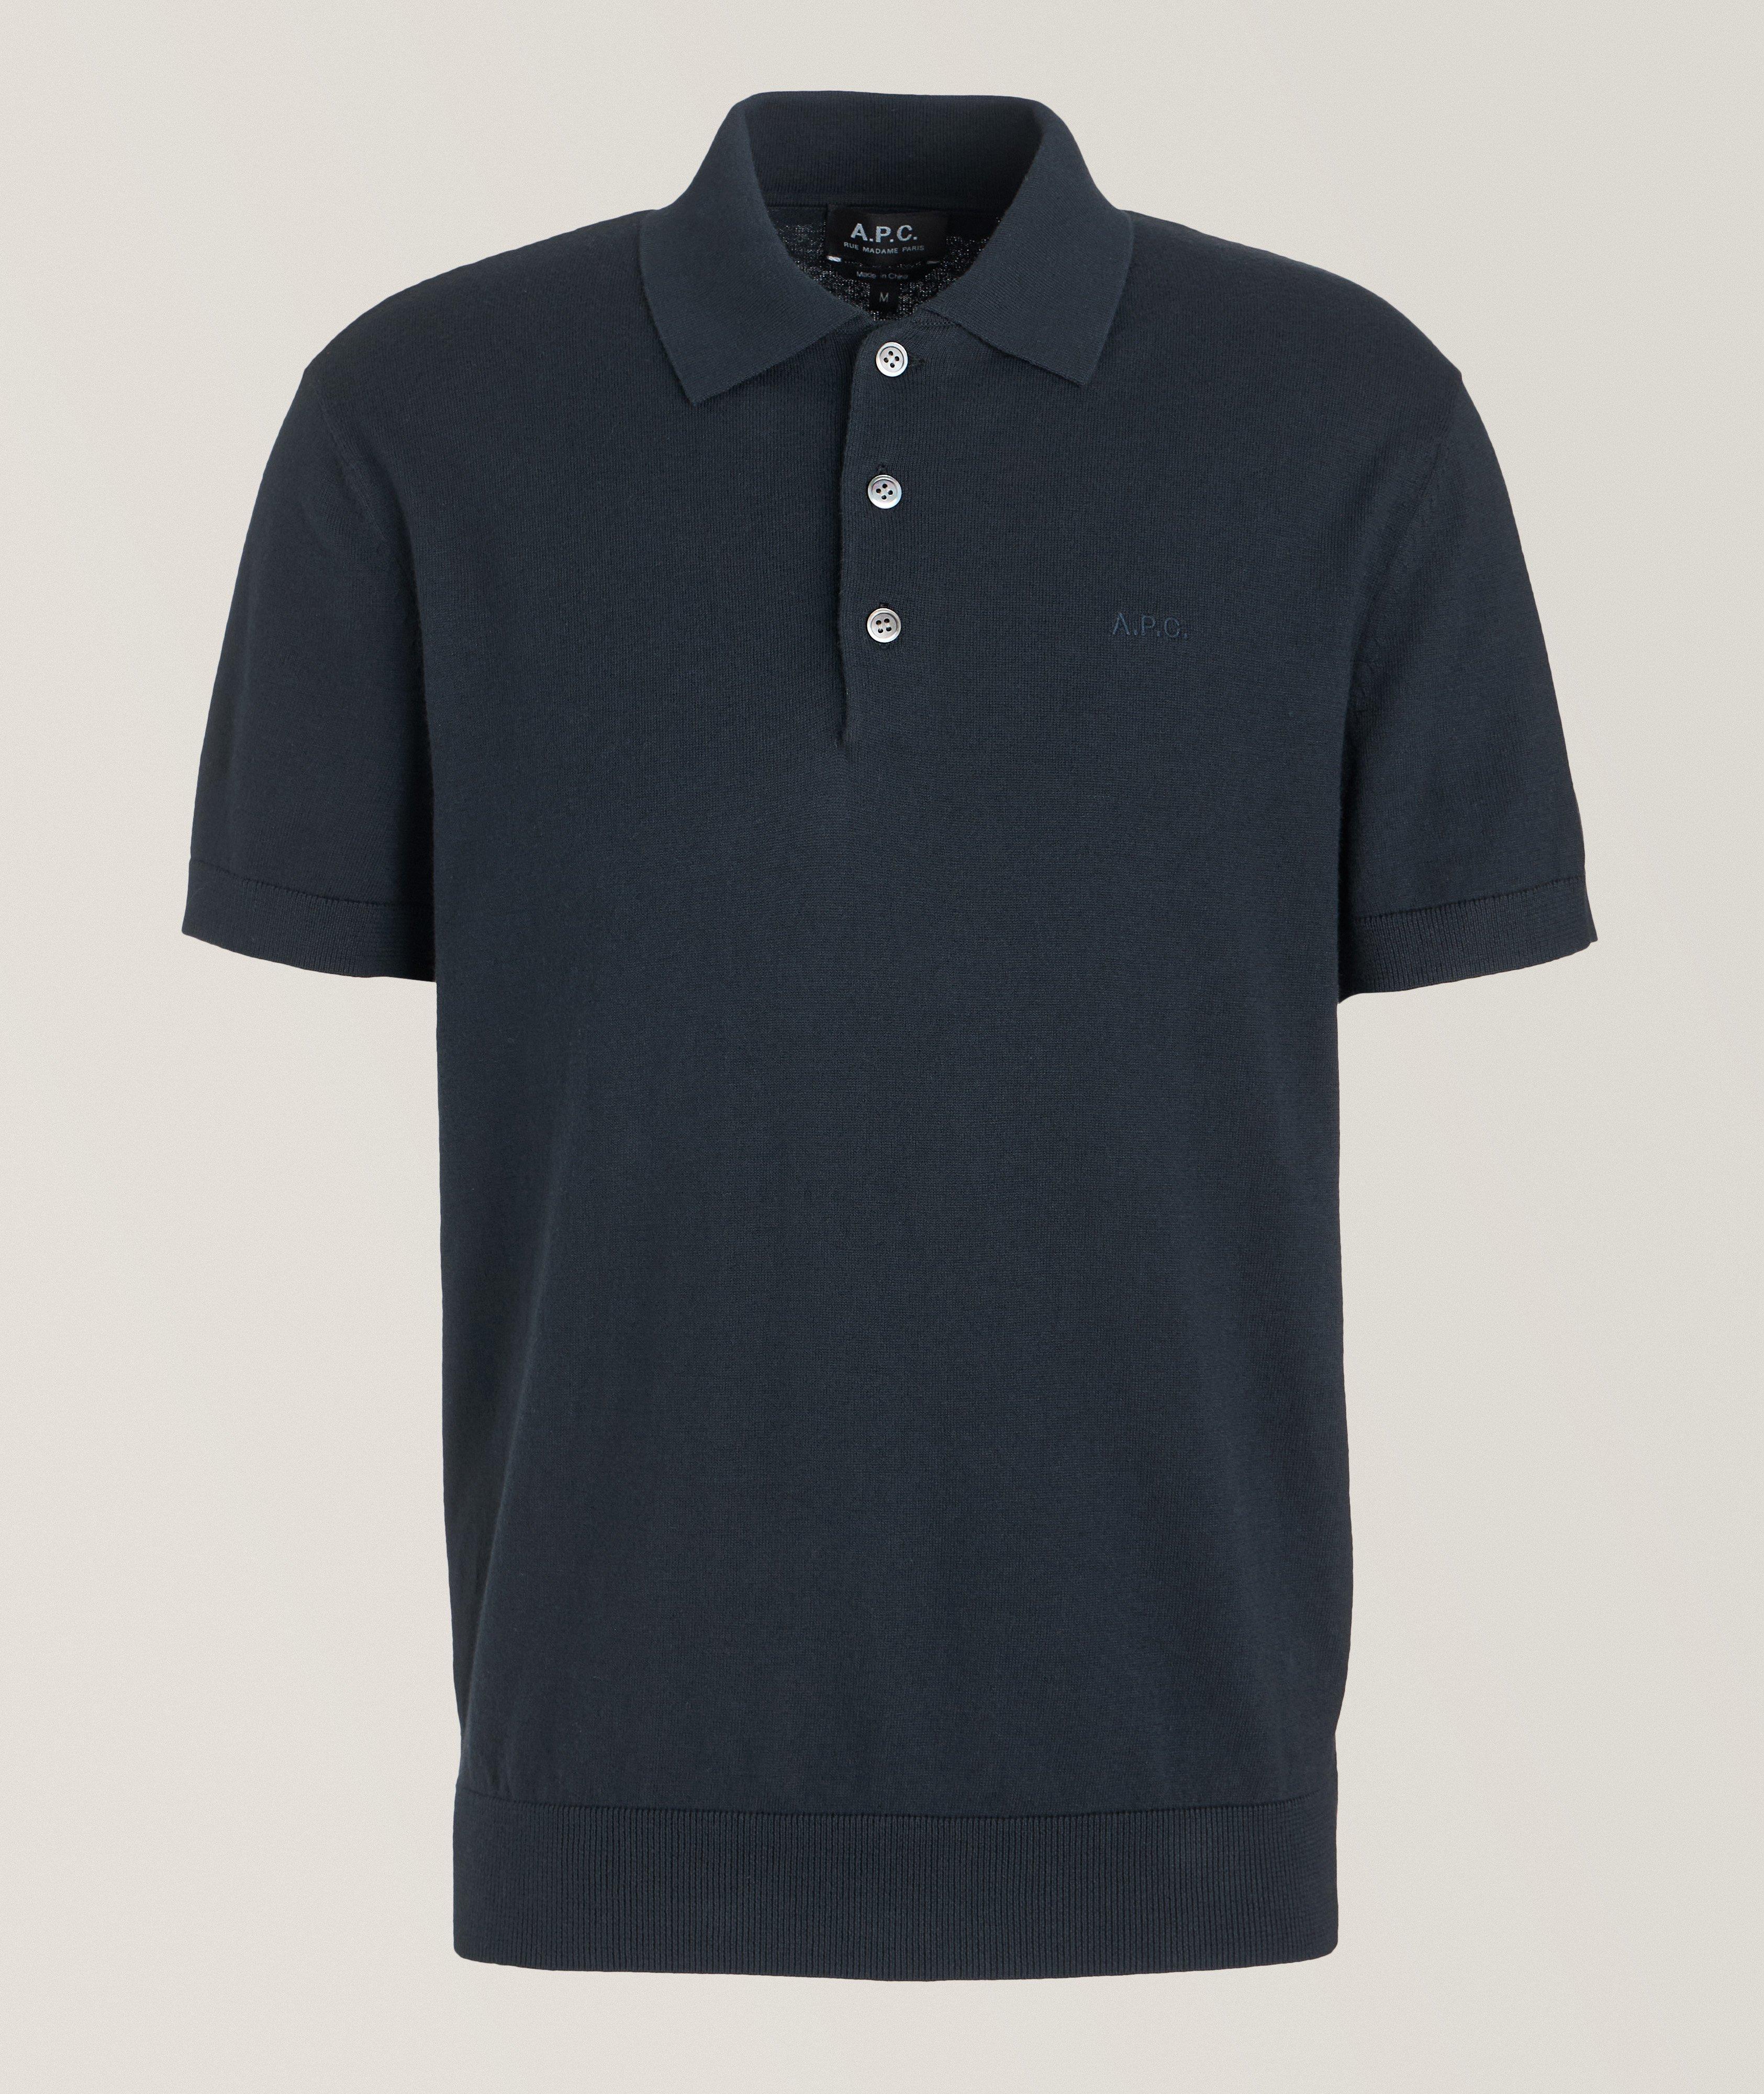 Gregory Organic Cotton-Cashmere Knitted Polo image 0